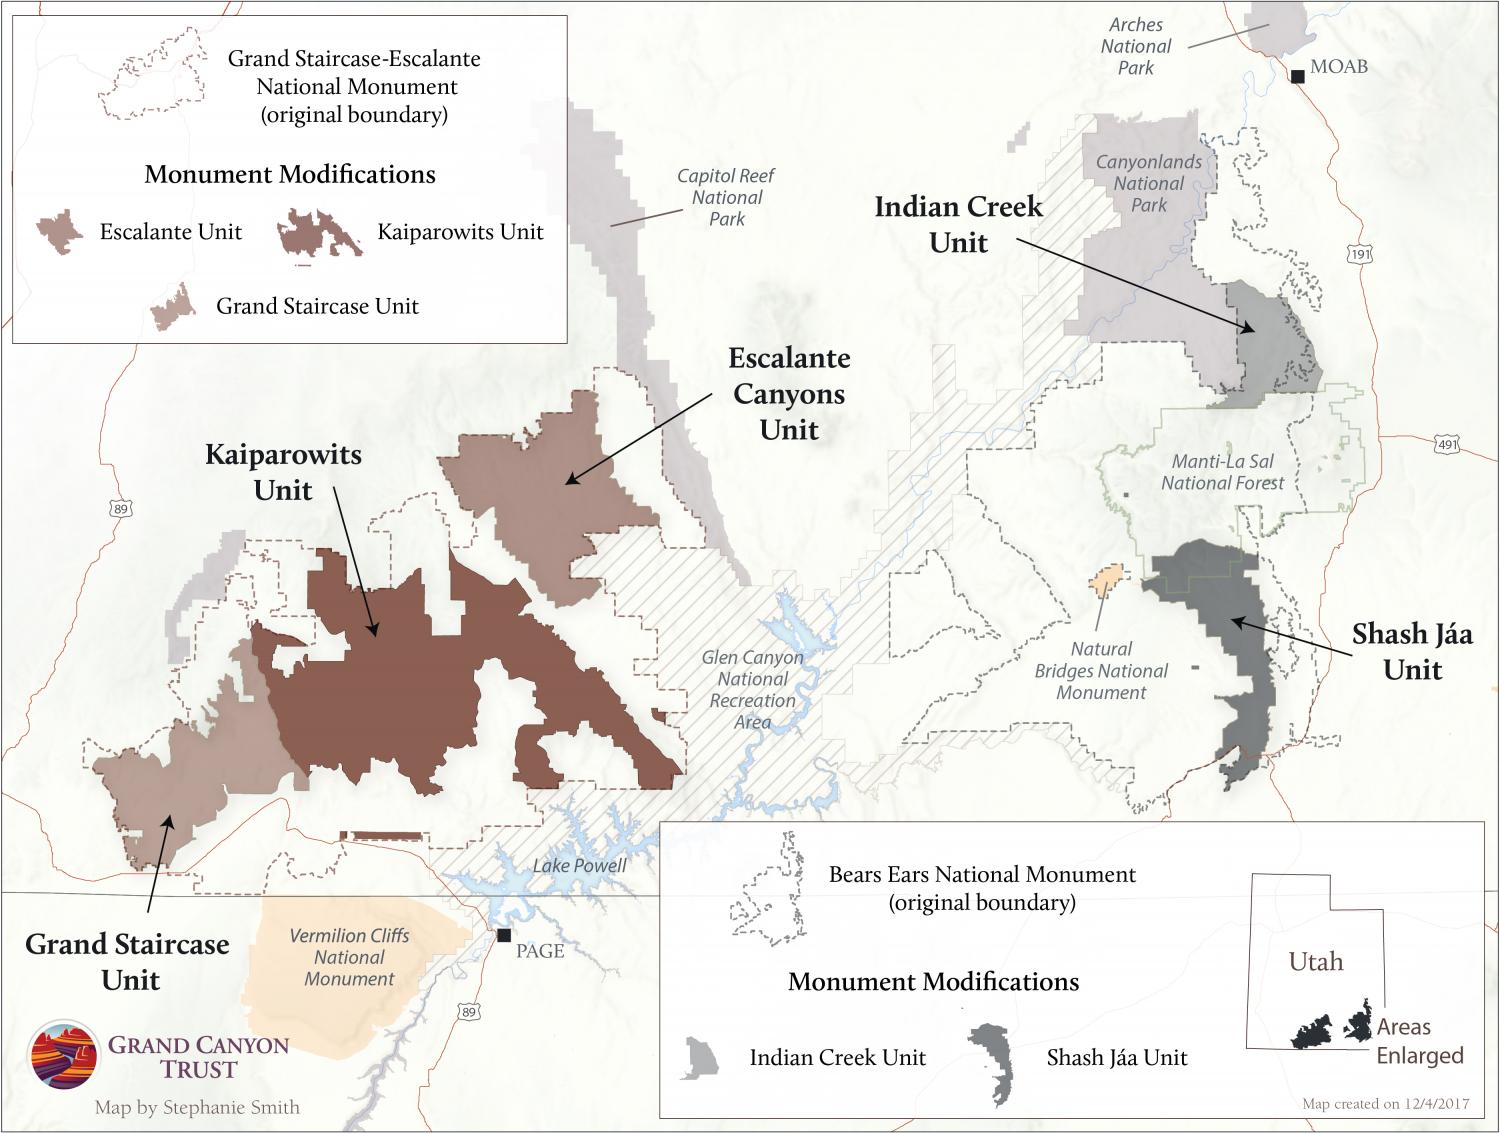 Bears Ears and Grand Staircase-Escalante modified boundaries maps